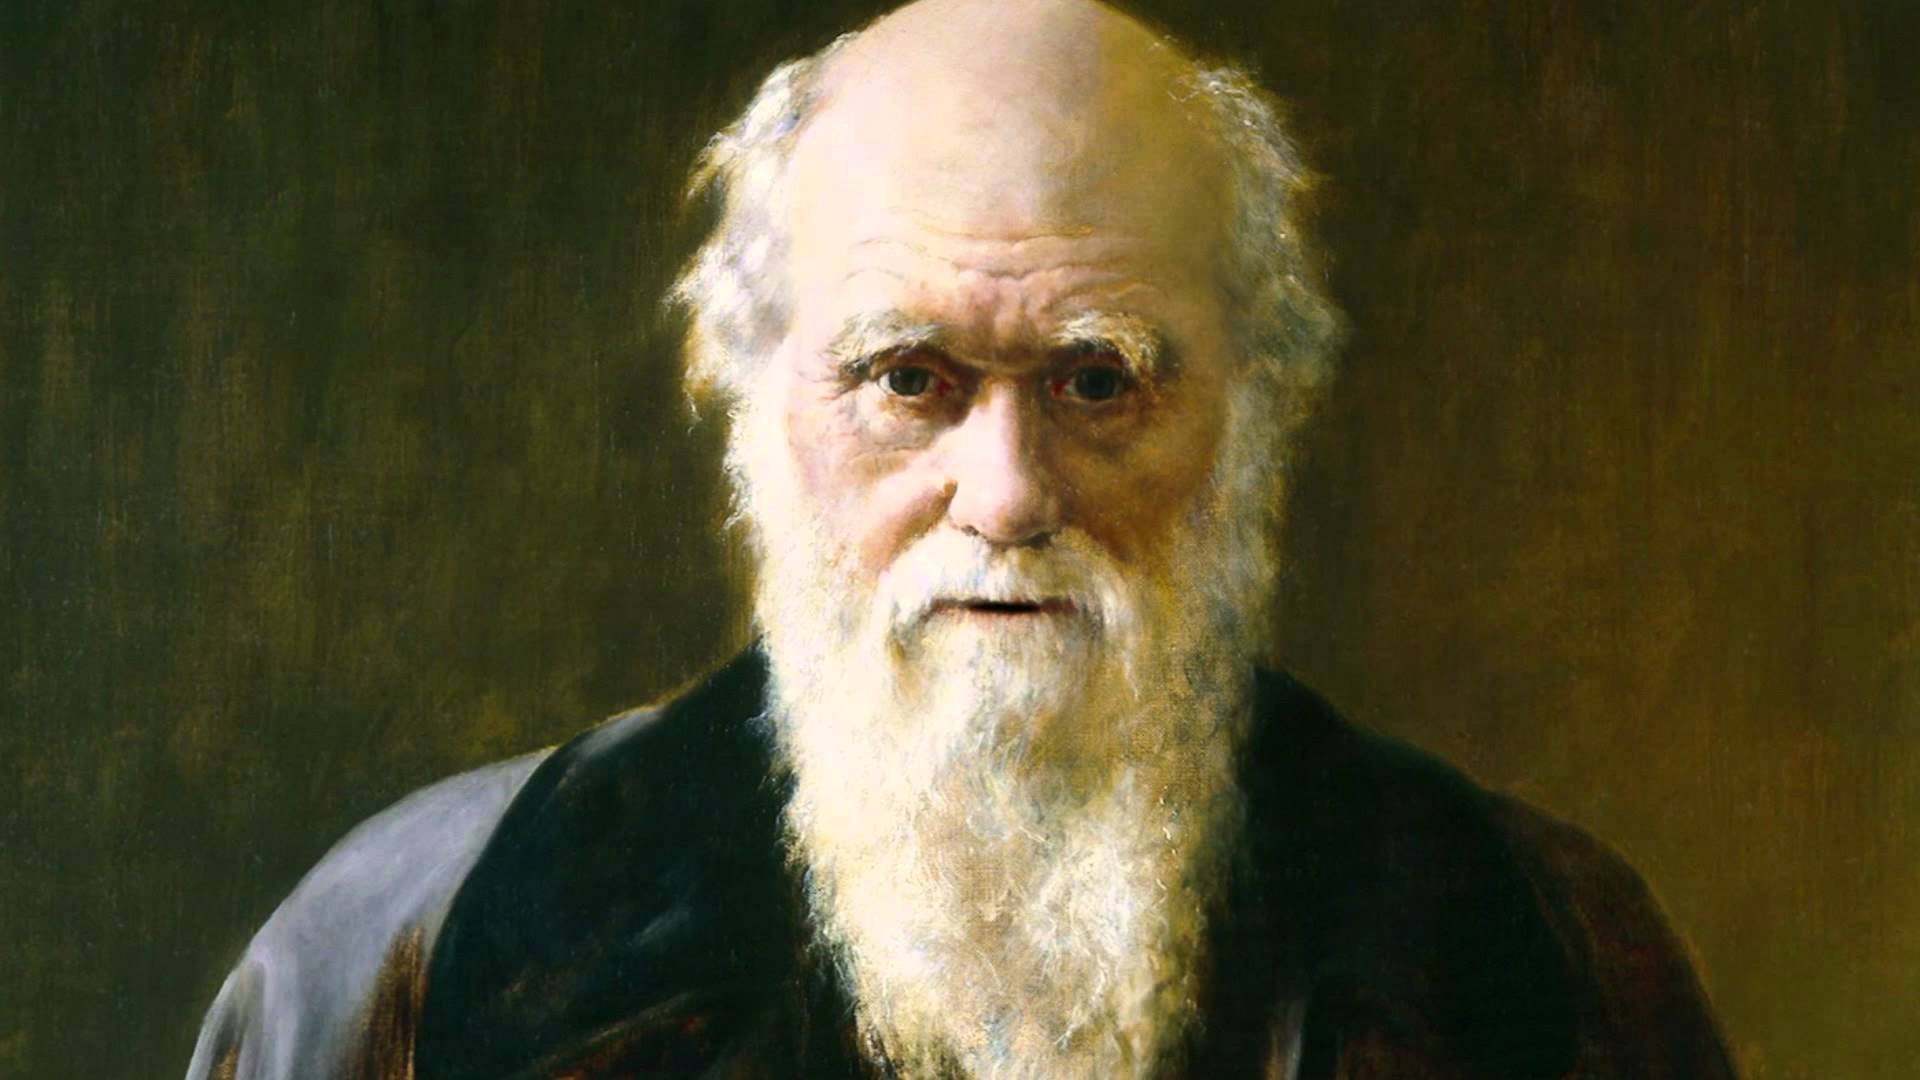 Read <i>The origin of species</i> by Charles Darwin. Its great, its free, and it is nothing but alt-right